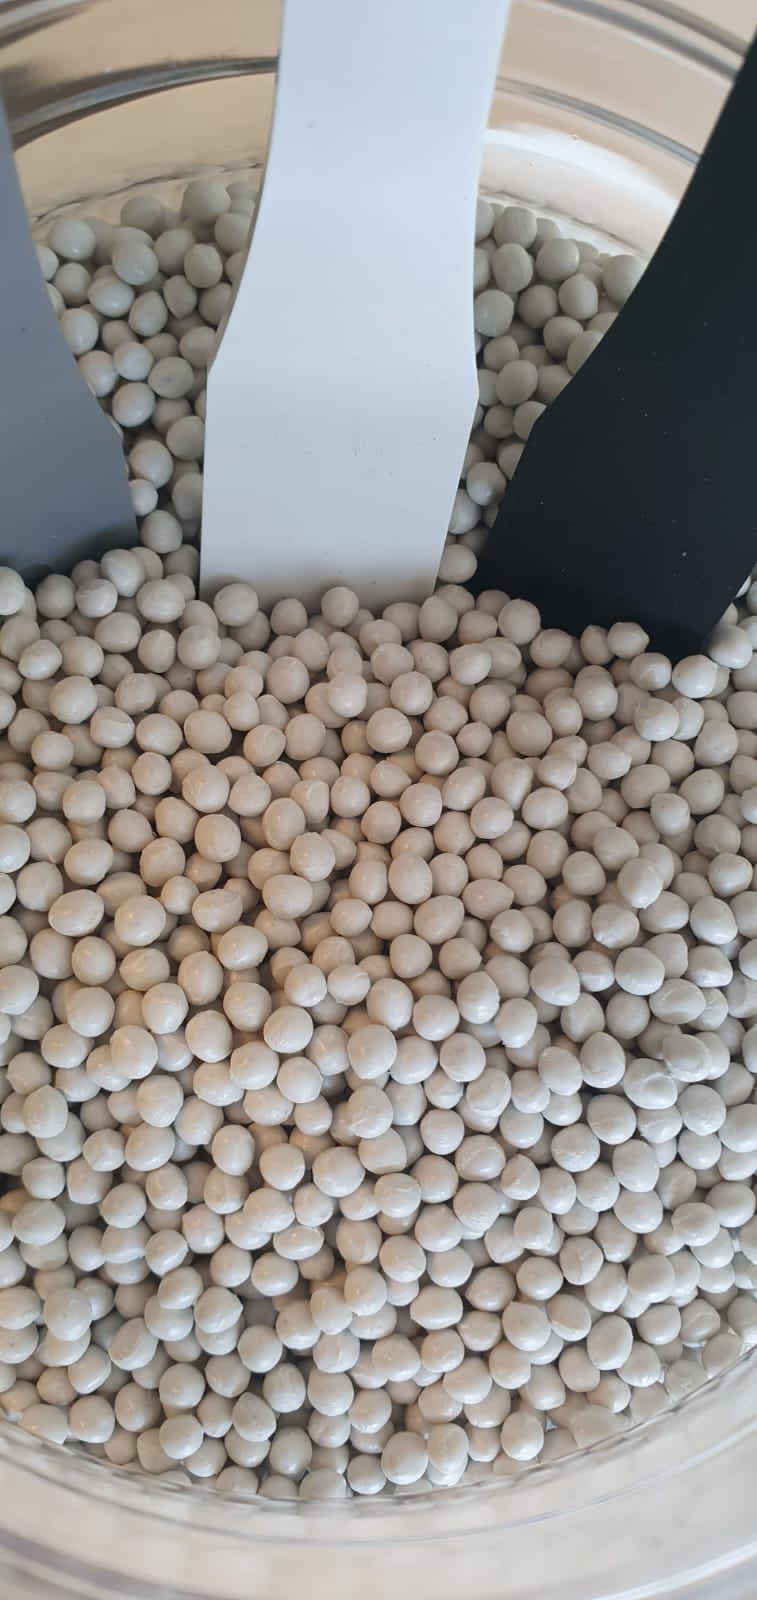 High Impact Polystyrene - PS Regranulate  recycling